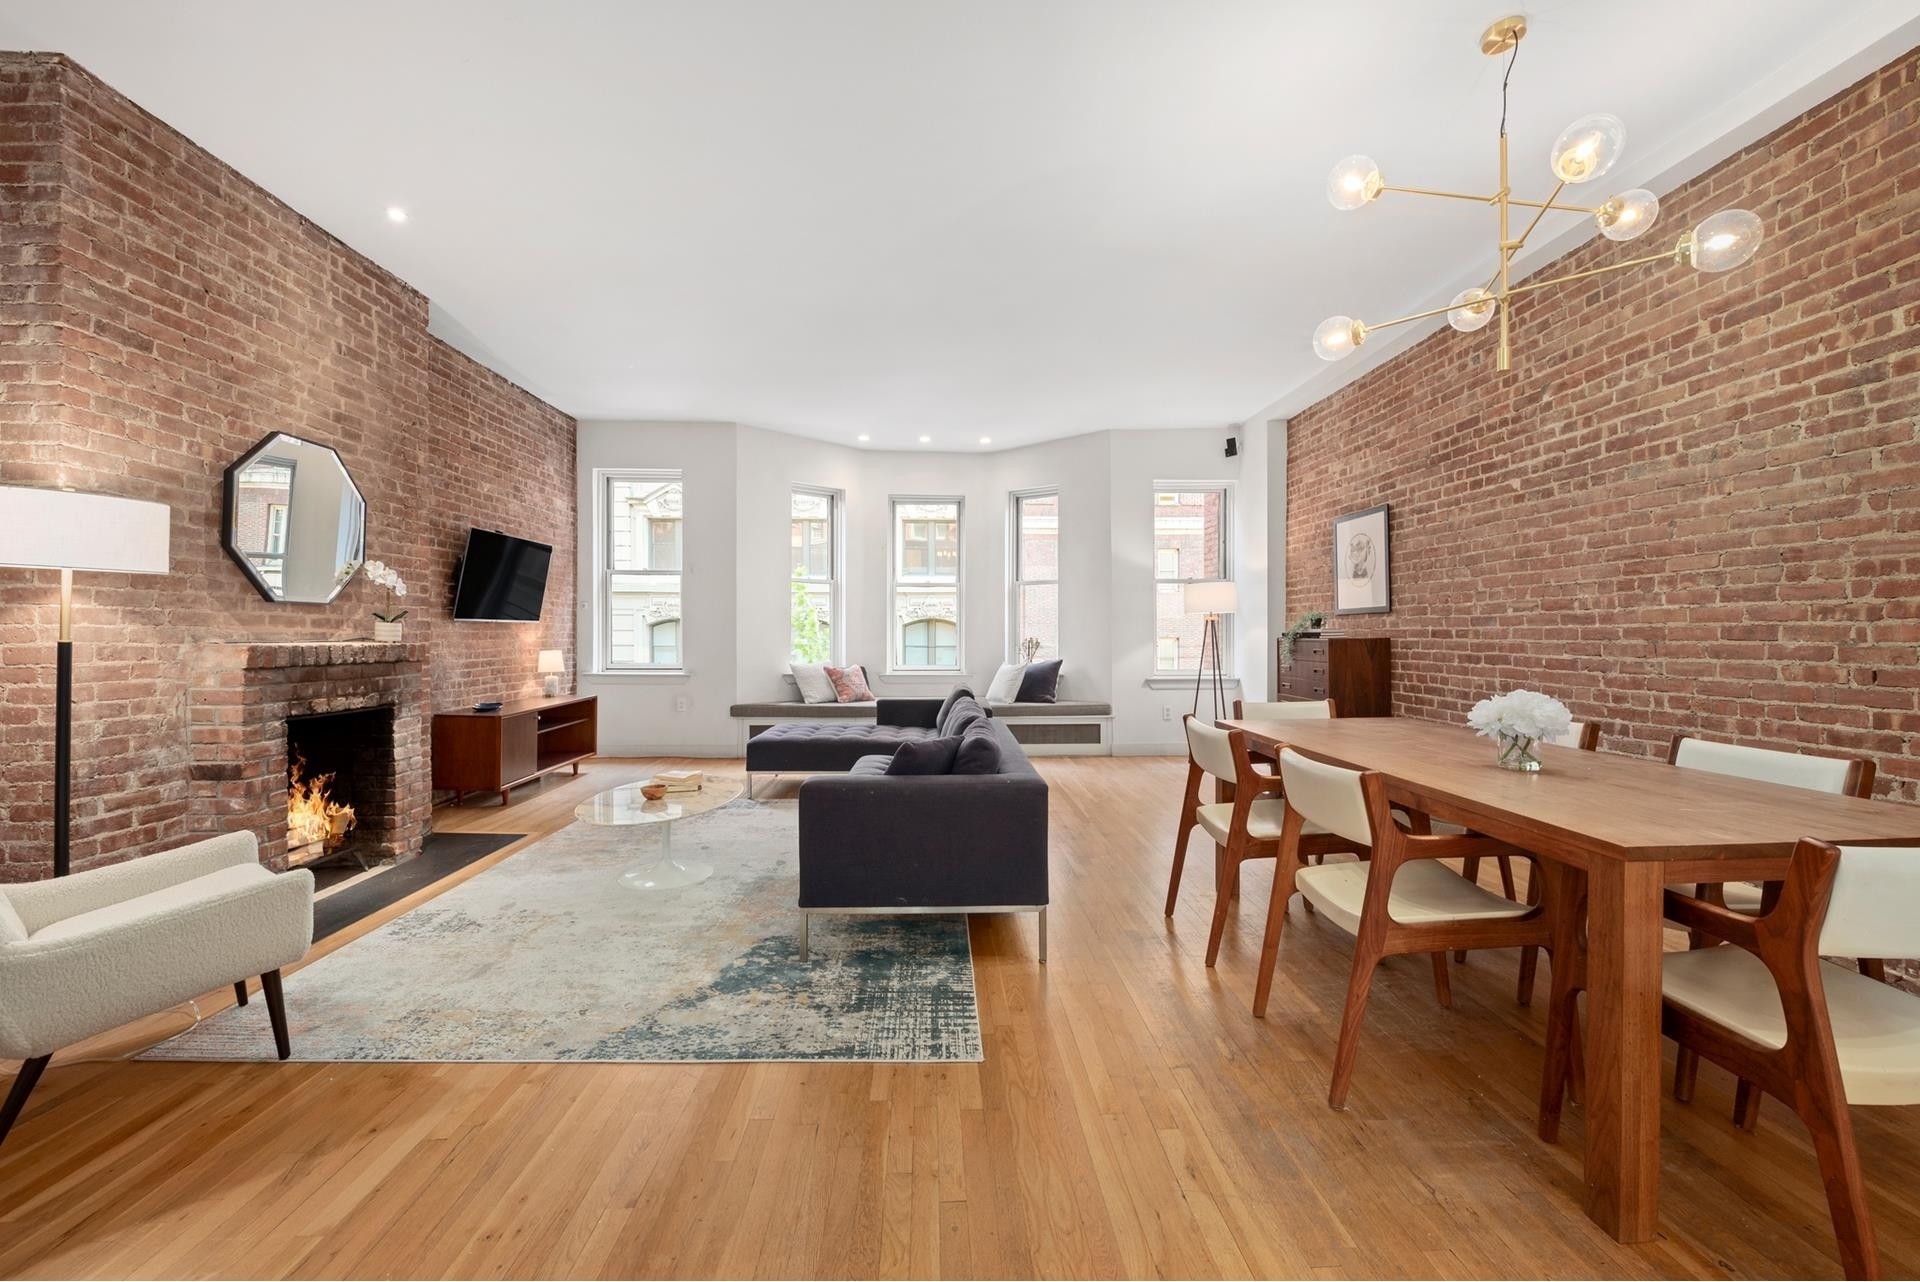 Co-op Properties for Sale at 159 W 74TH ST, 2 Upper West Side, New York, NY 10023